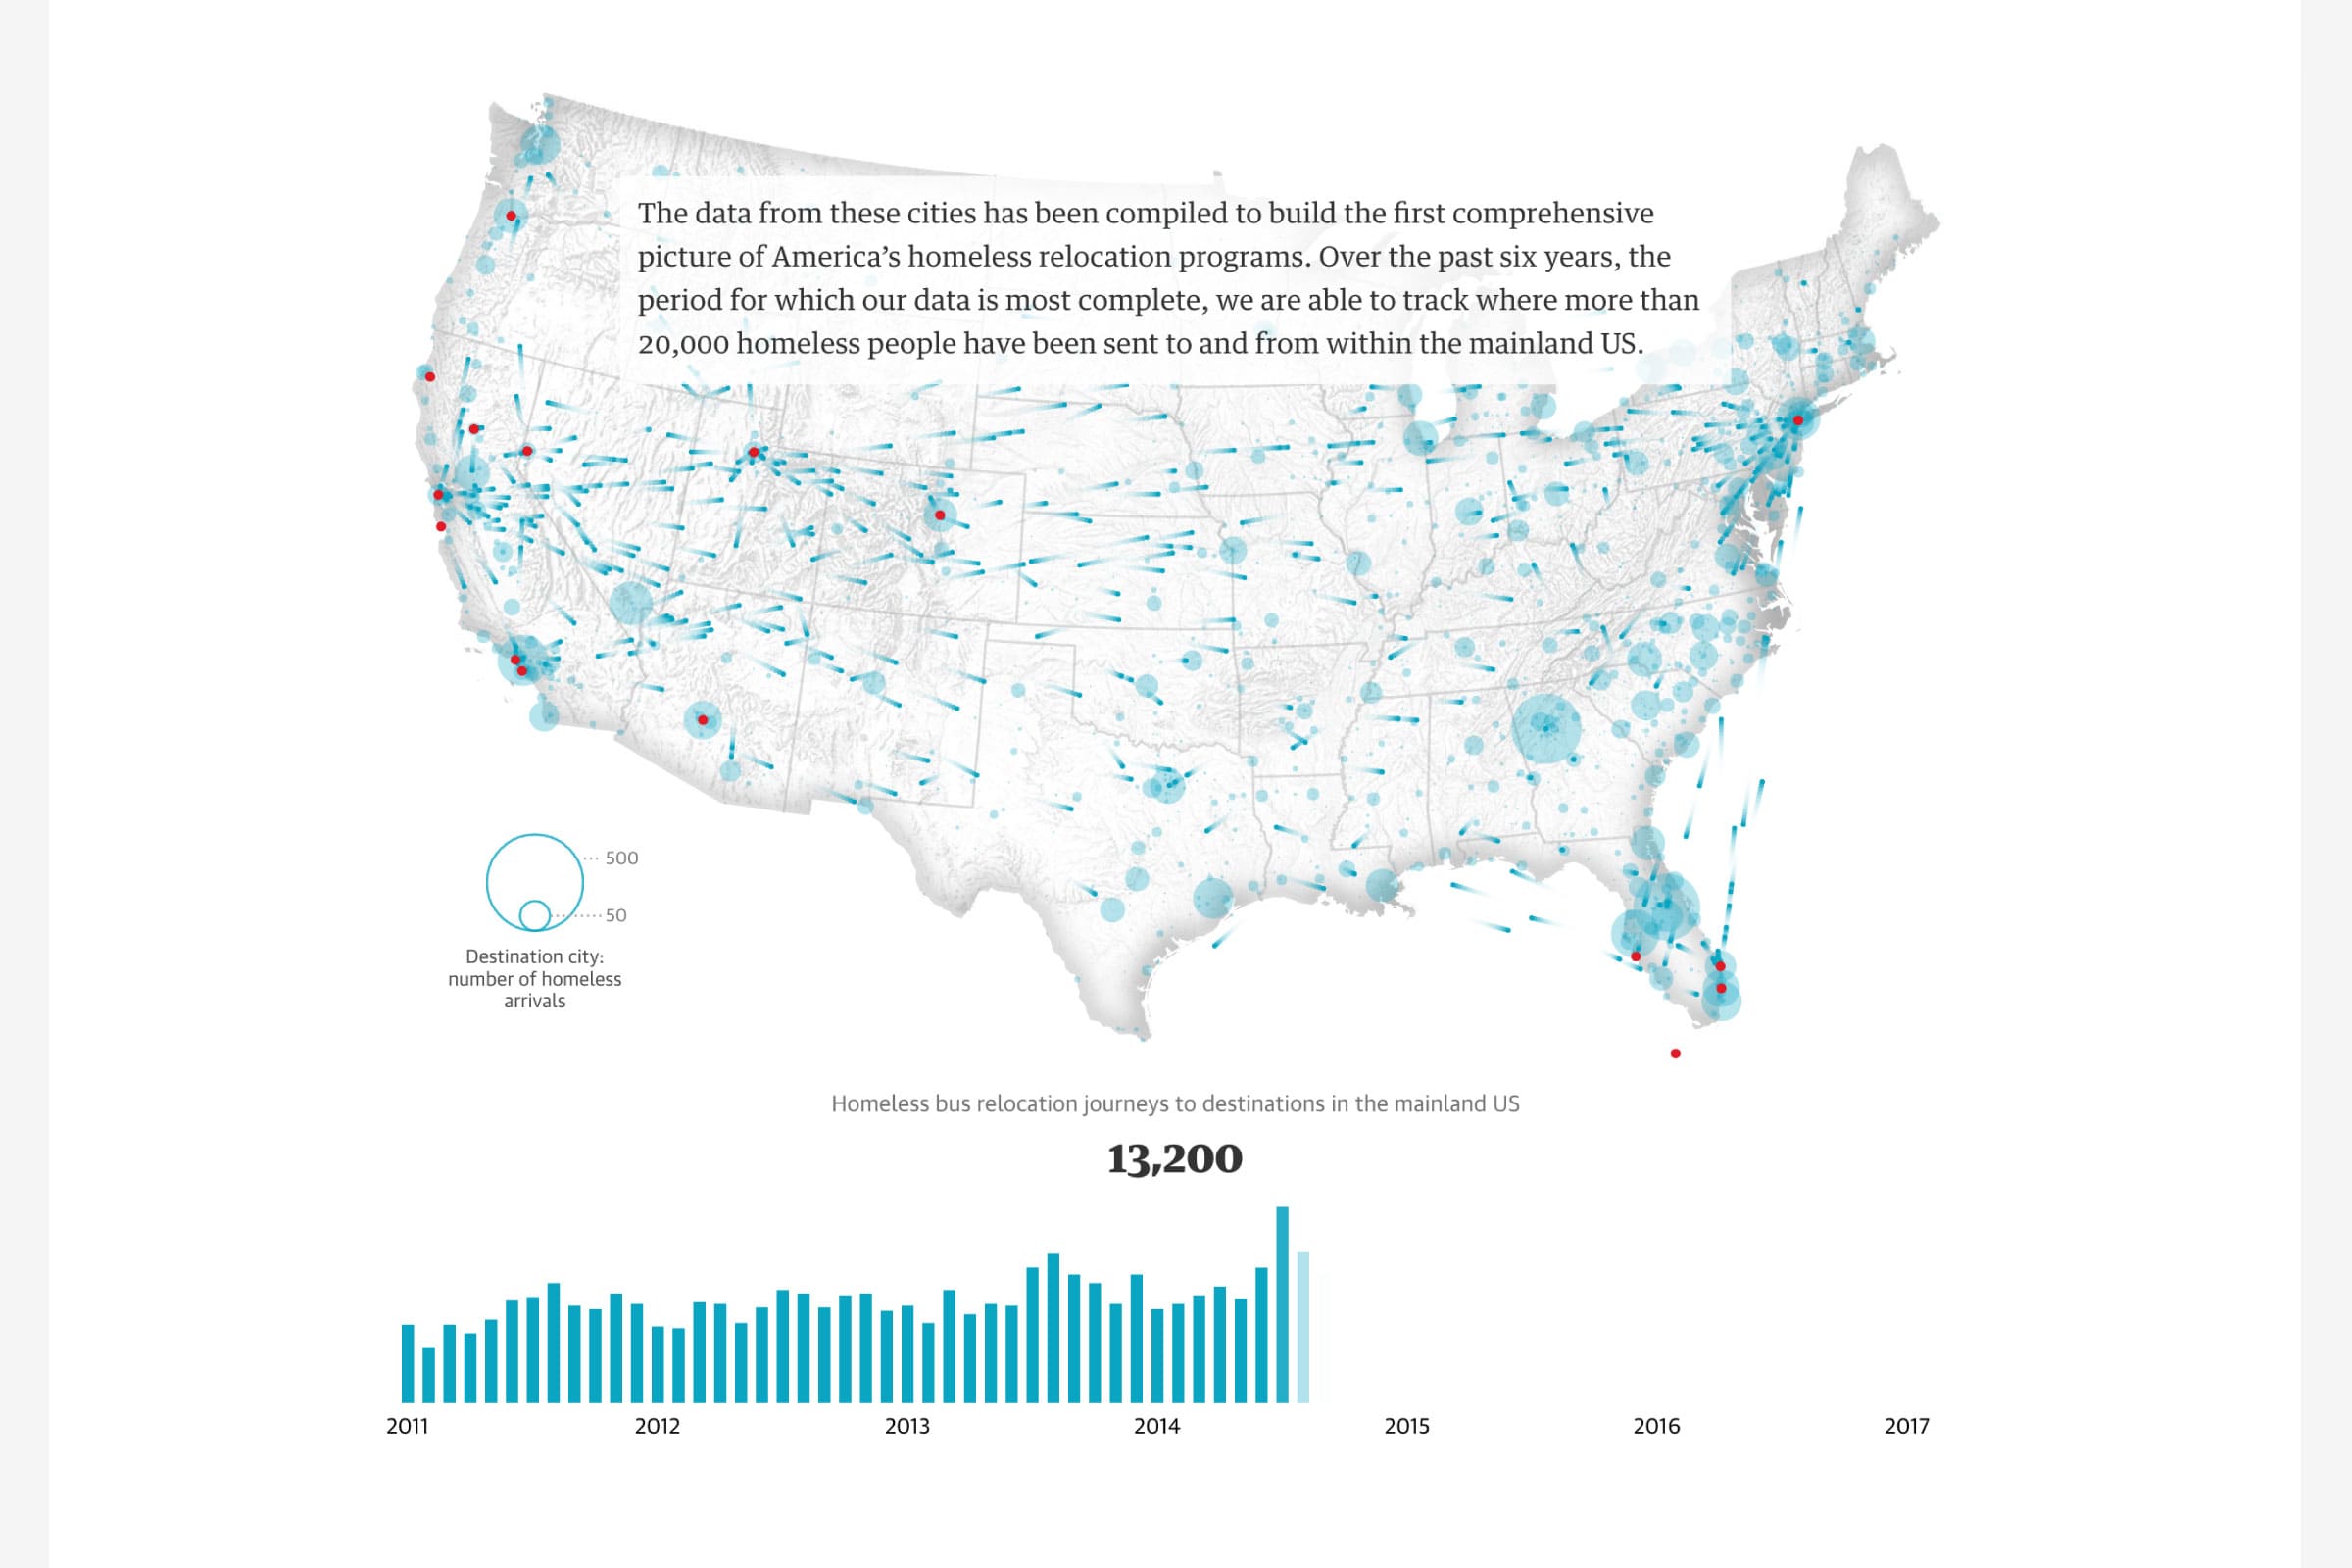 Homeless people moving from their origin city to their destination across the US map